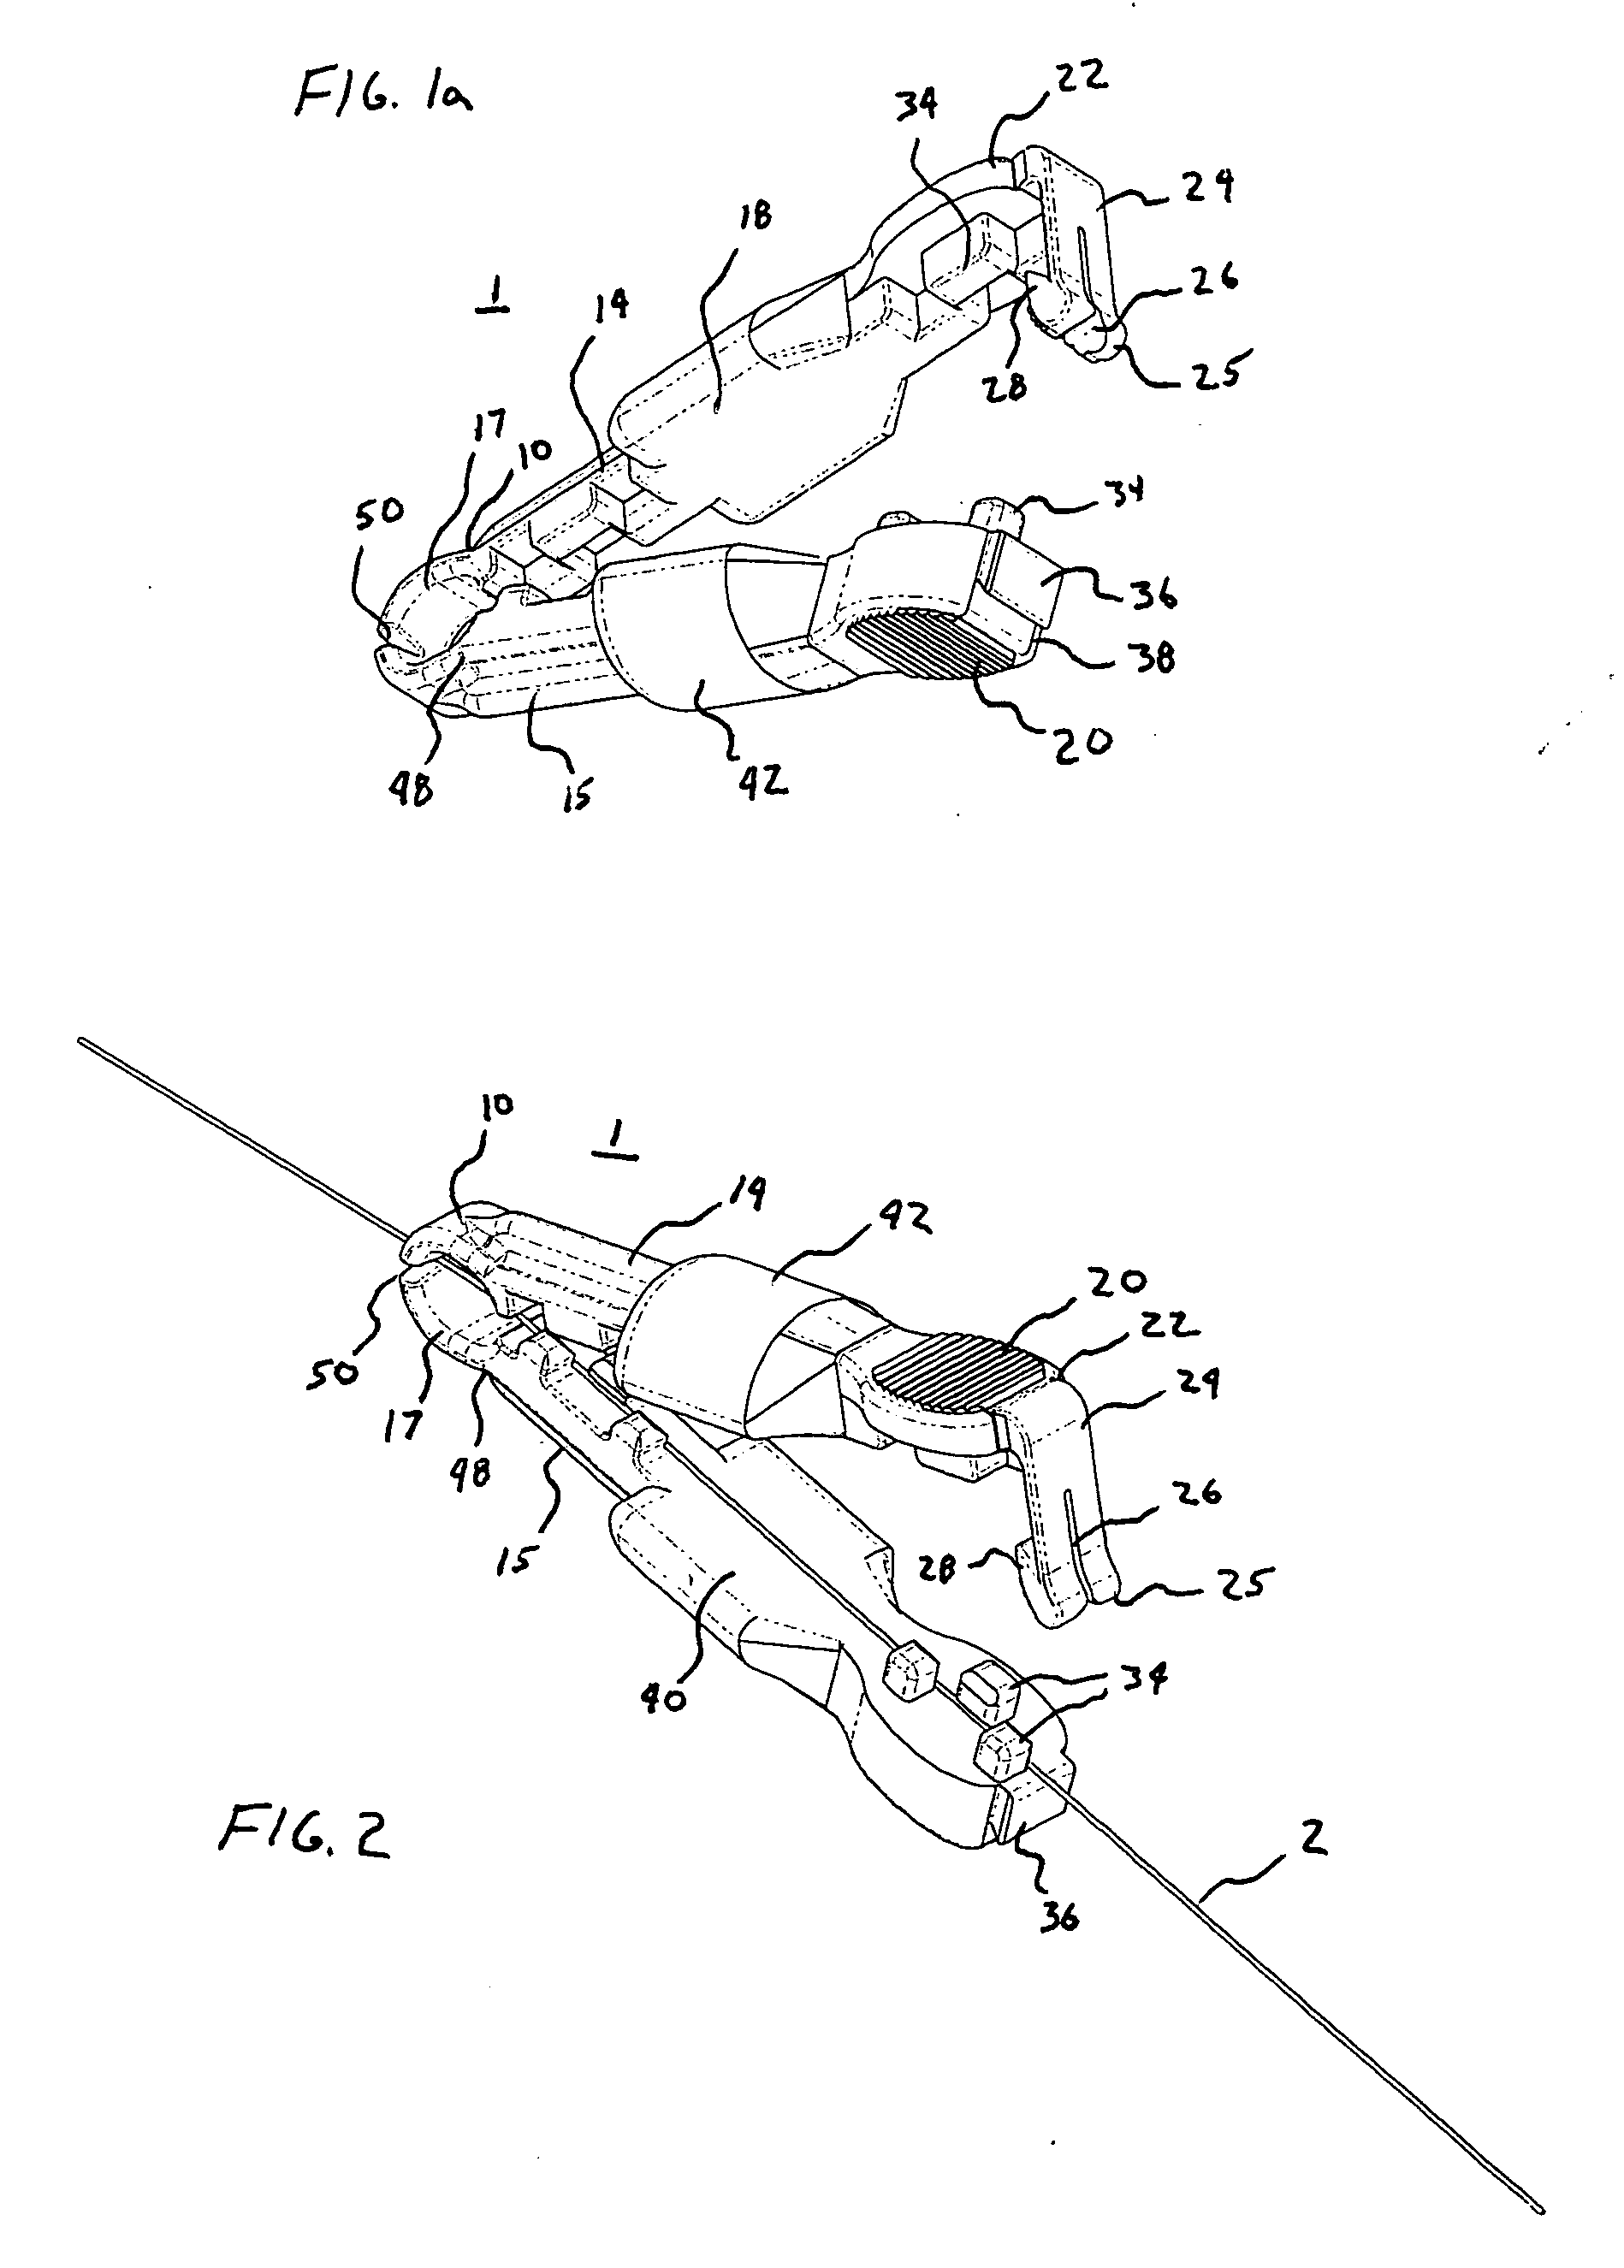 Quick-release torquer apparatus for delivering and maintaining a medical guidewire